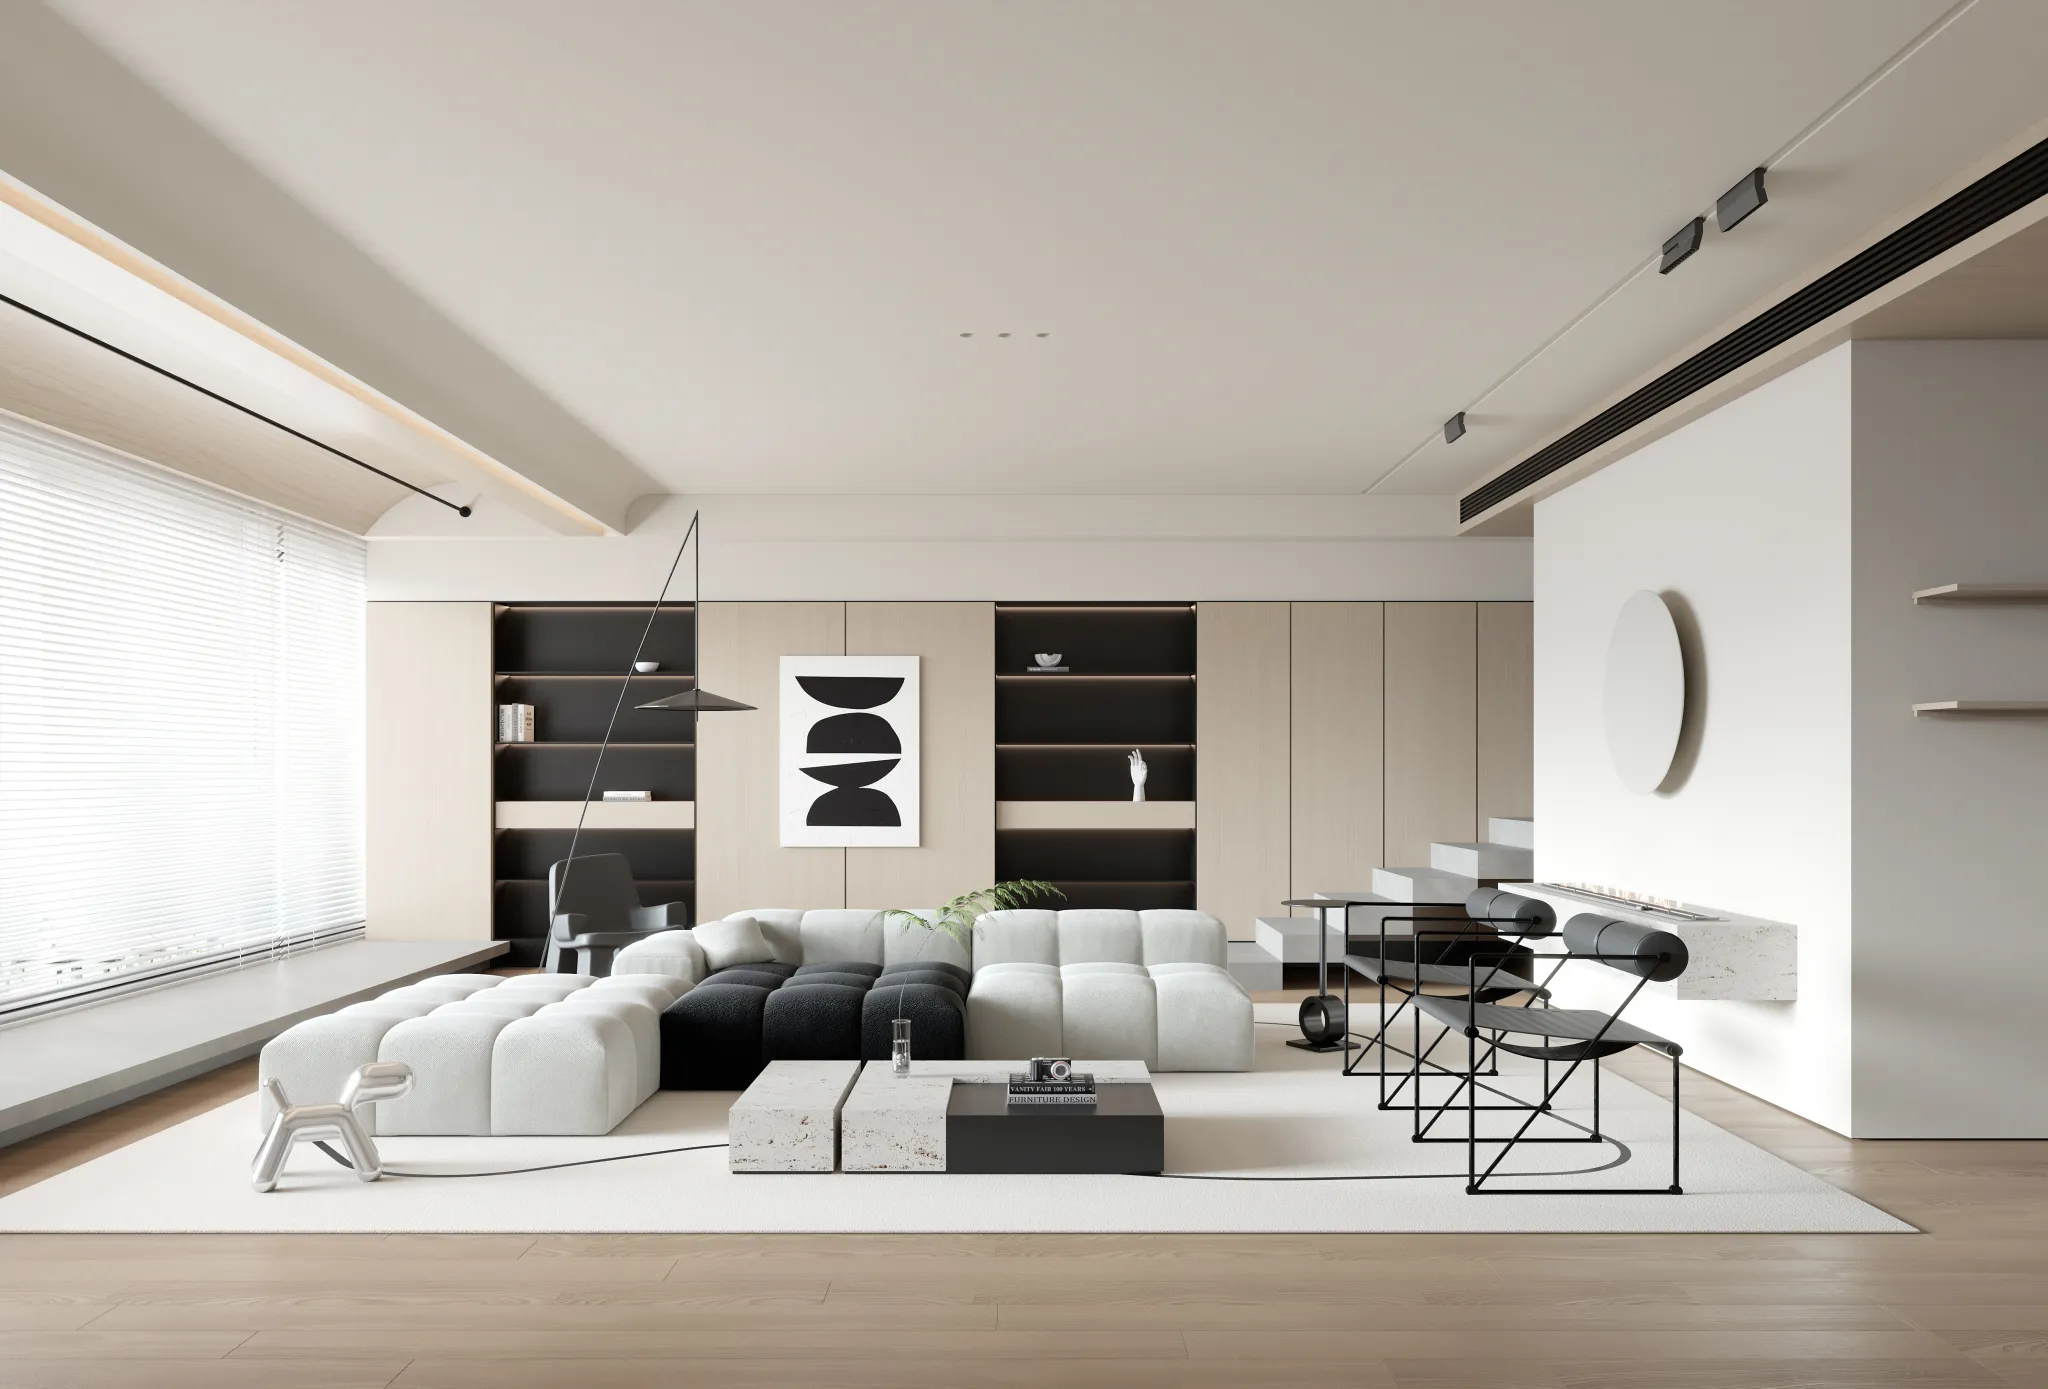 HOUSE SPACE 3D SCENES – LIVING ROOM – 0174